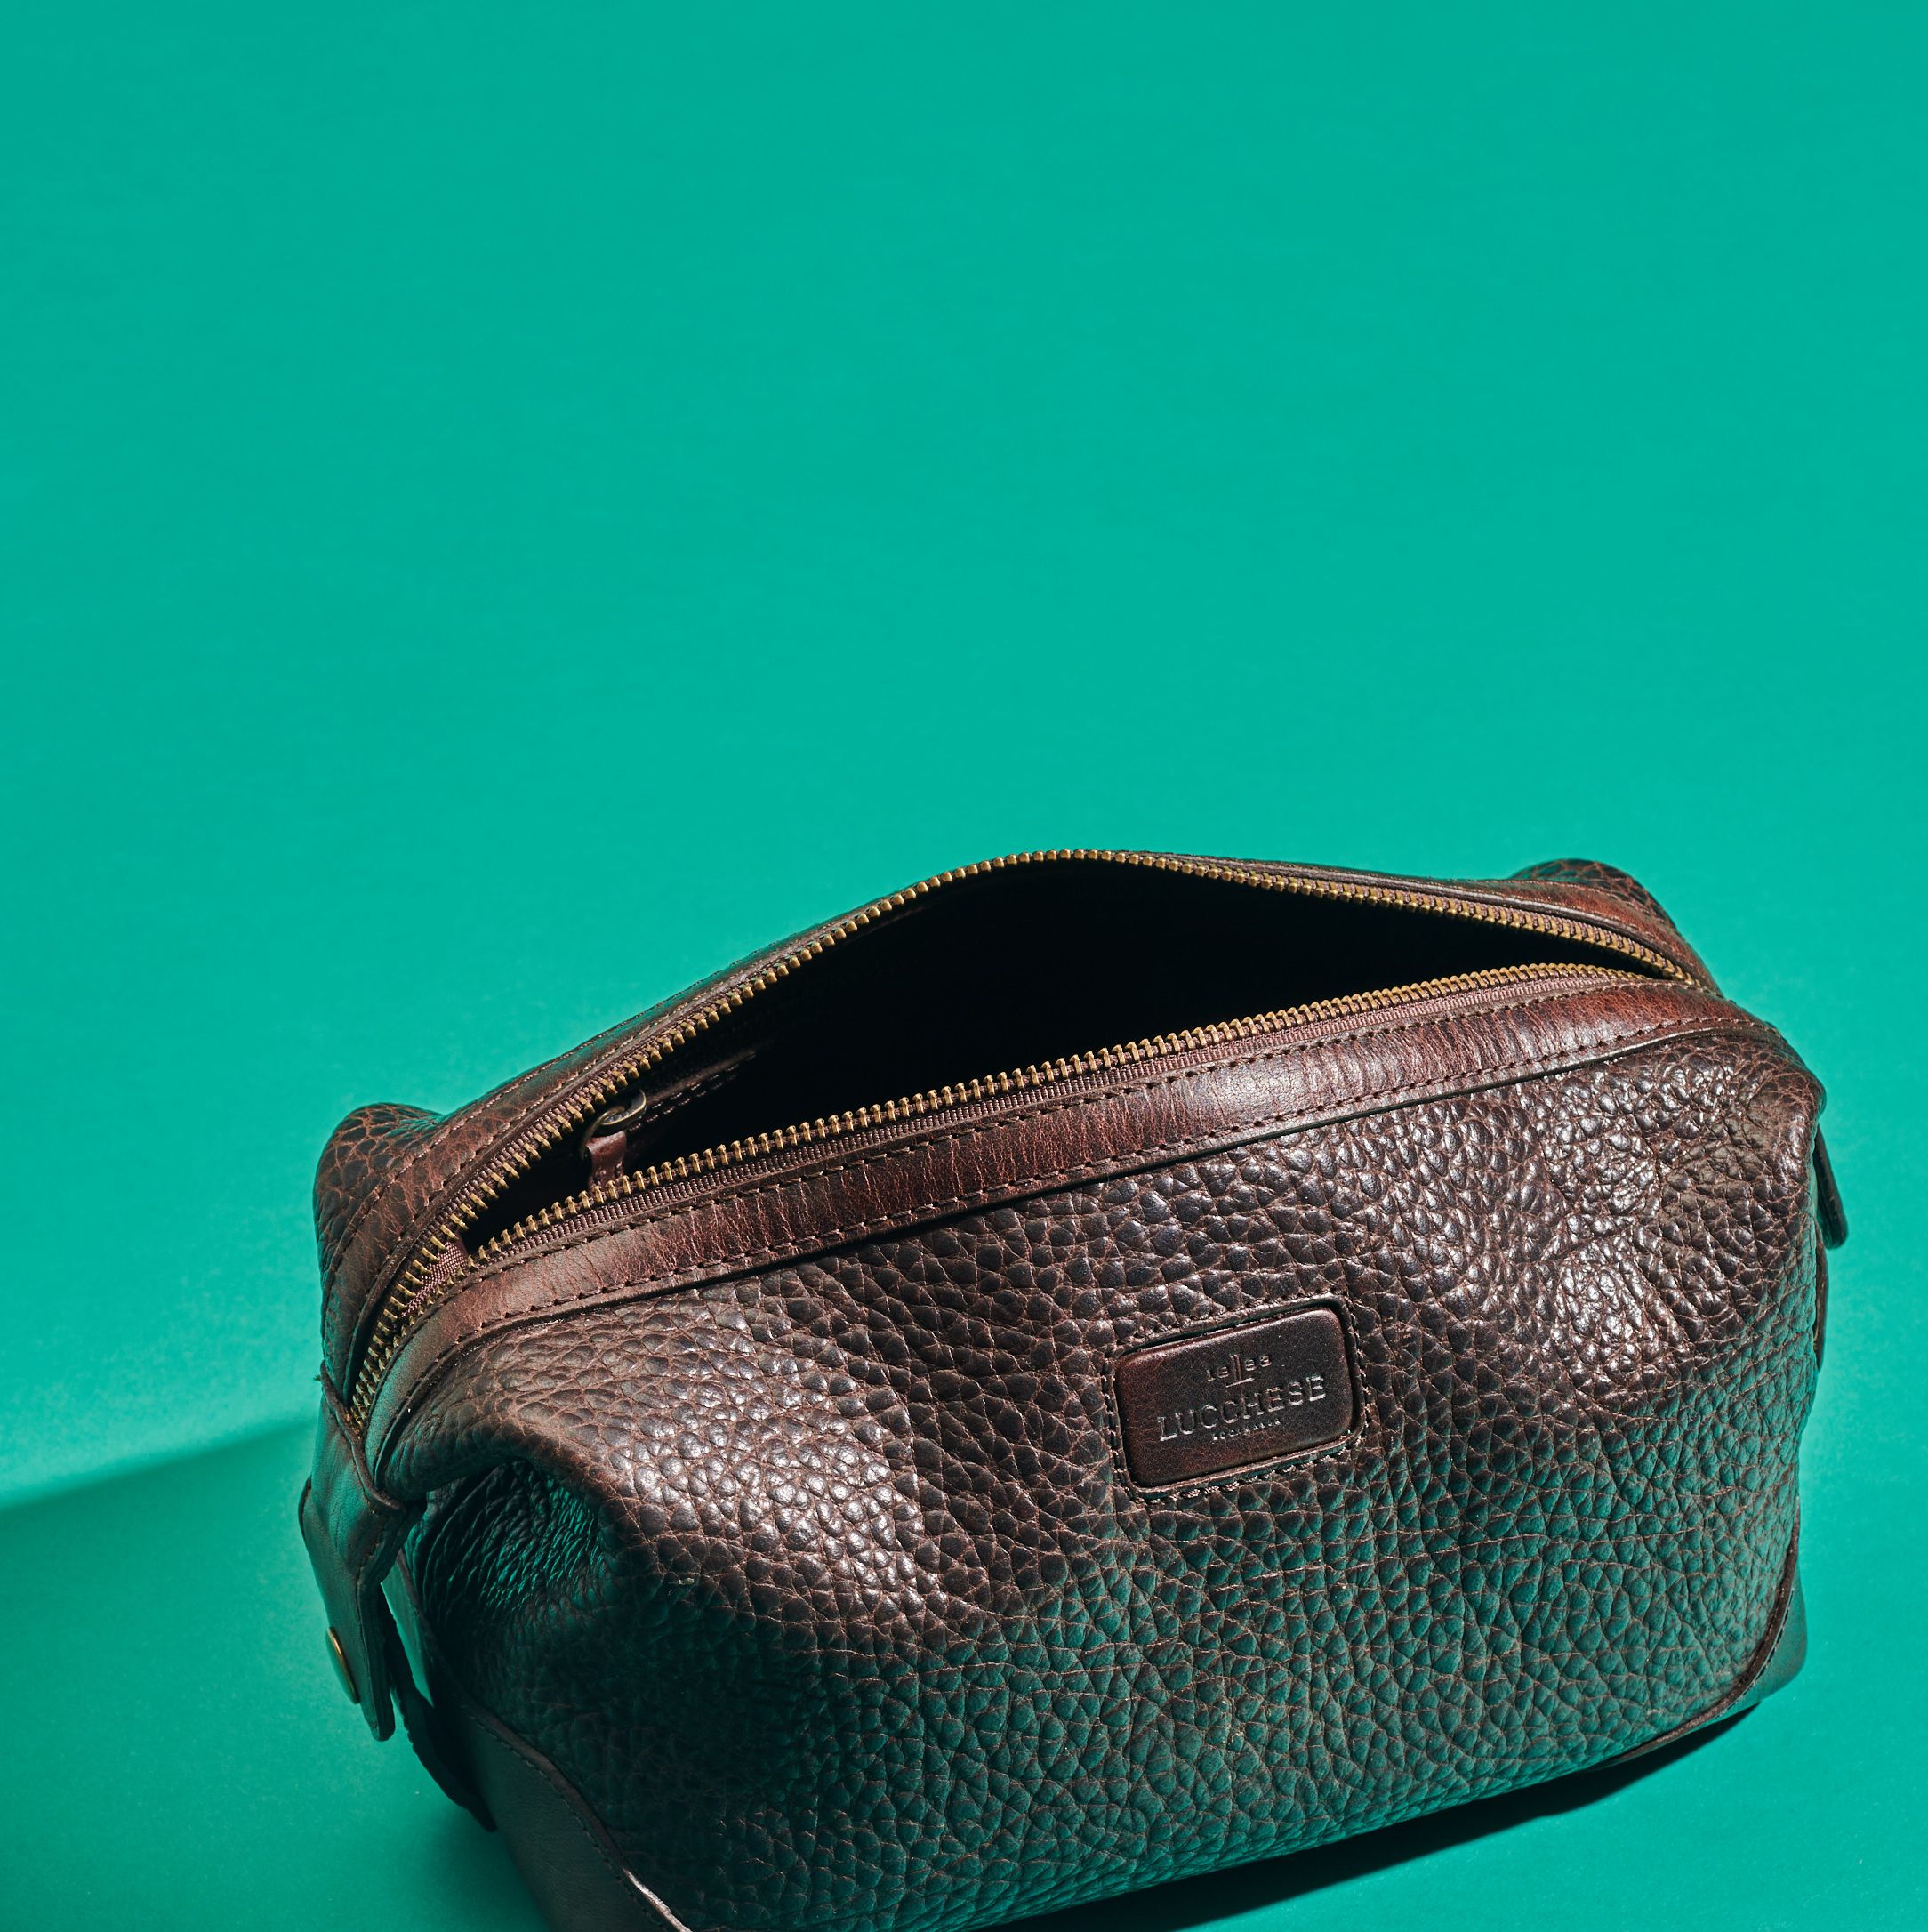 The Dopp Kit That Will Last the Rest of My Life